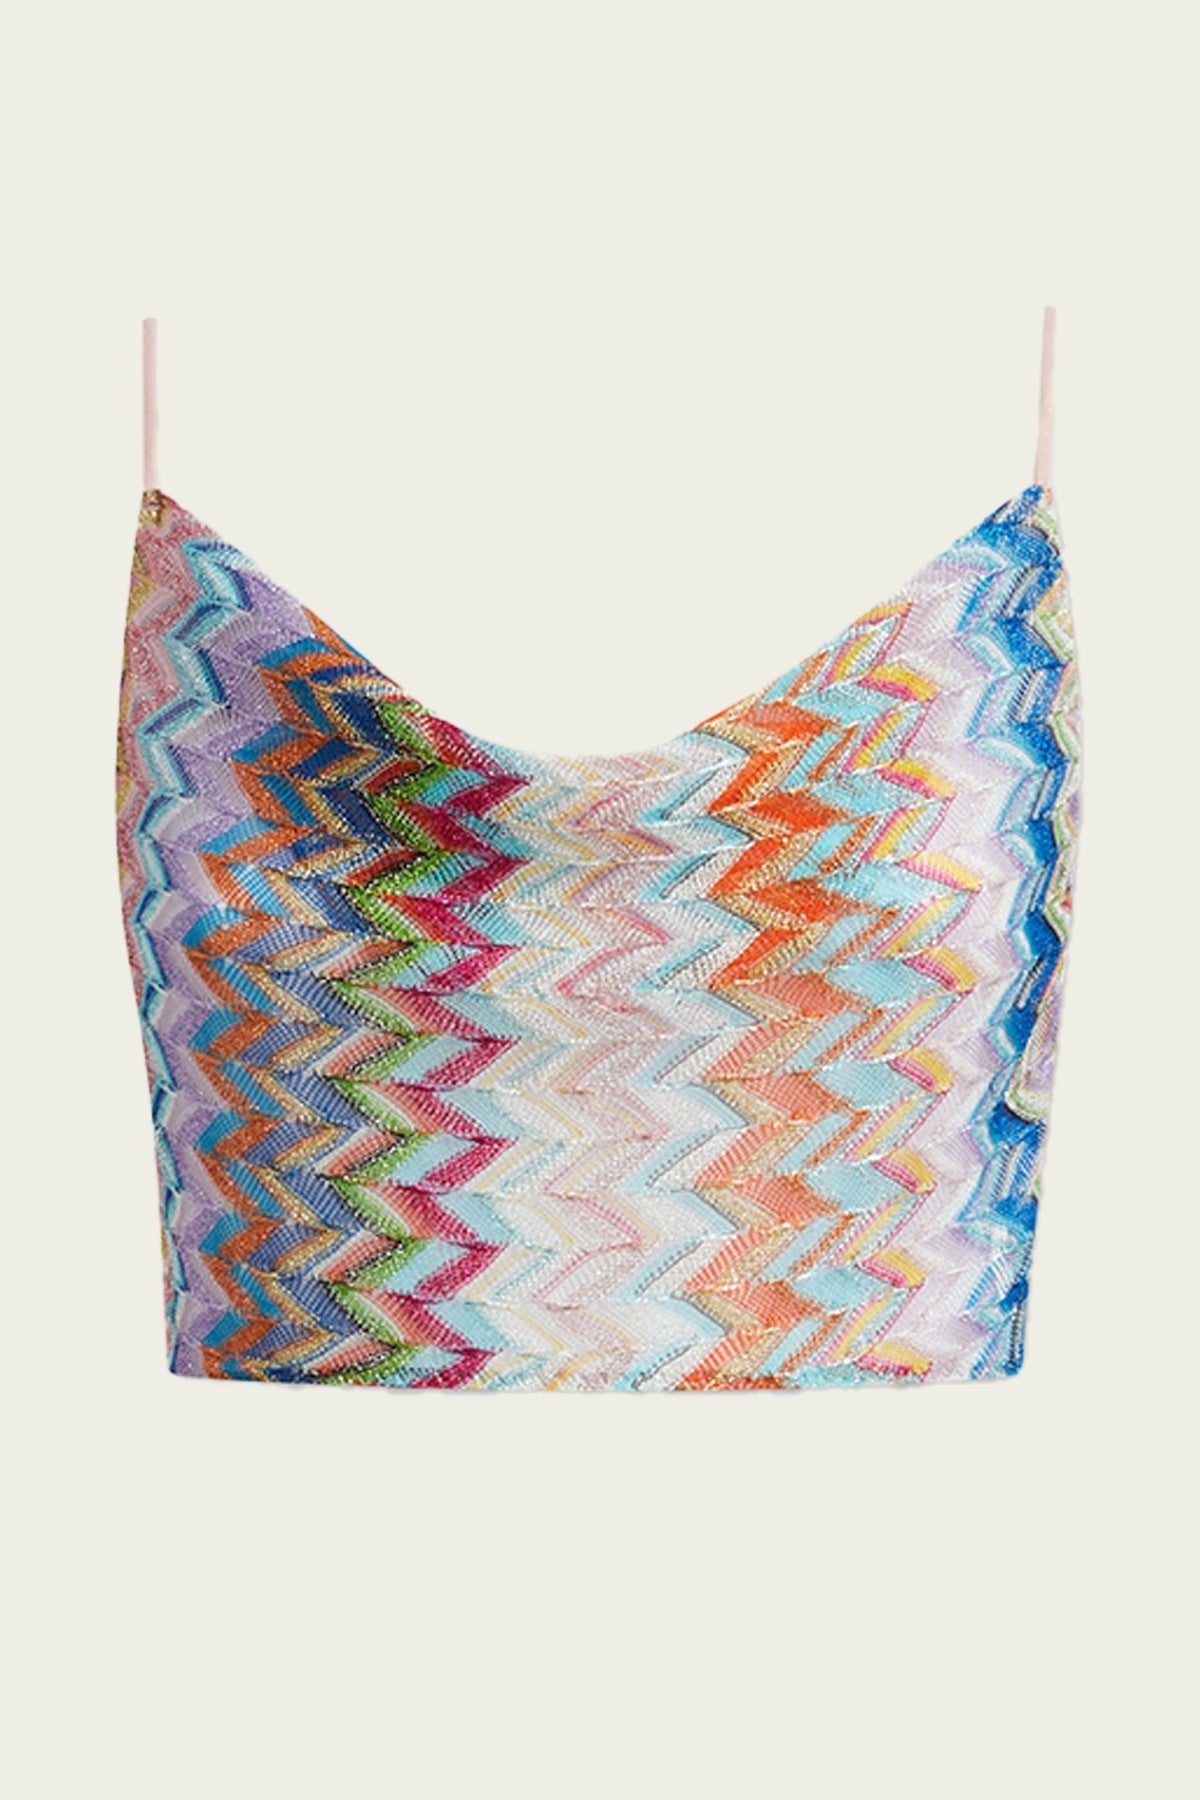 Zig-Zag Cropped Top in Multicolor Space-Dyed - shop-olivia.com